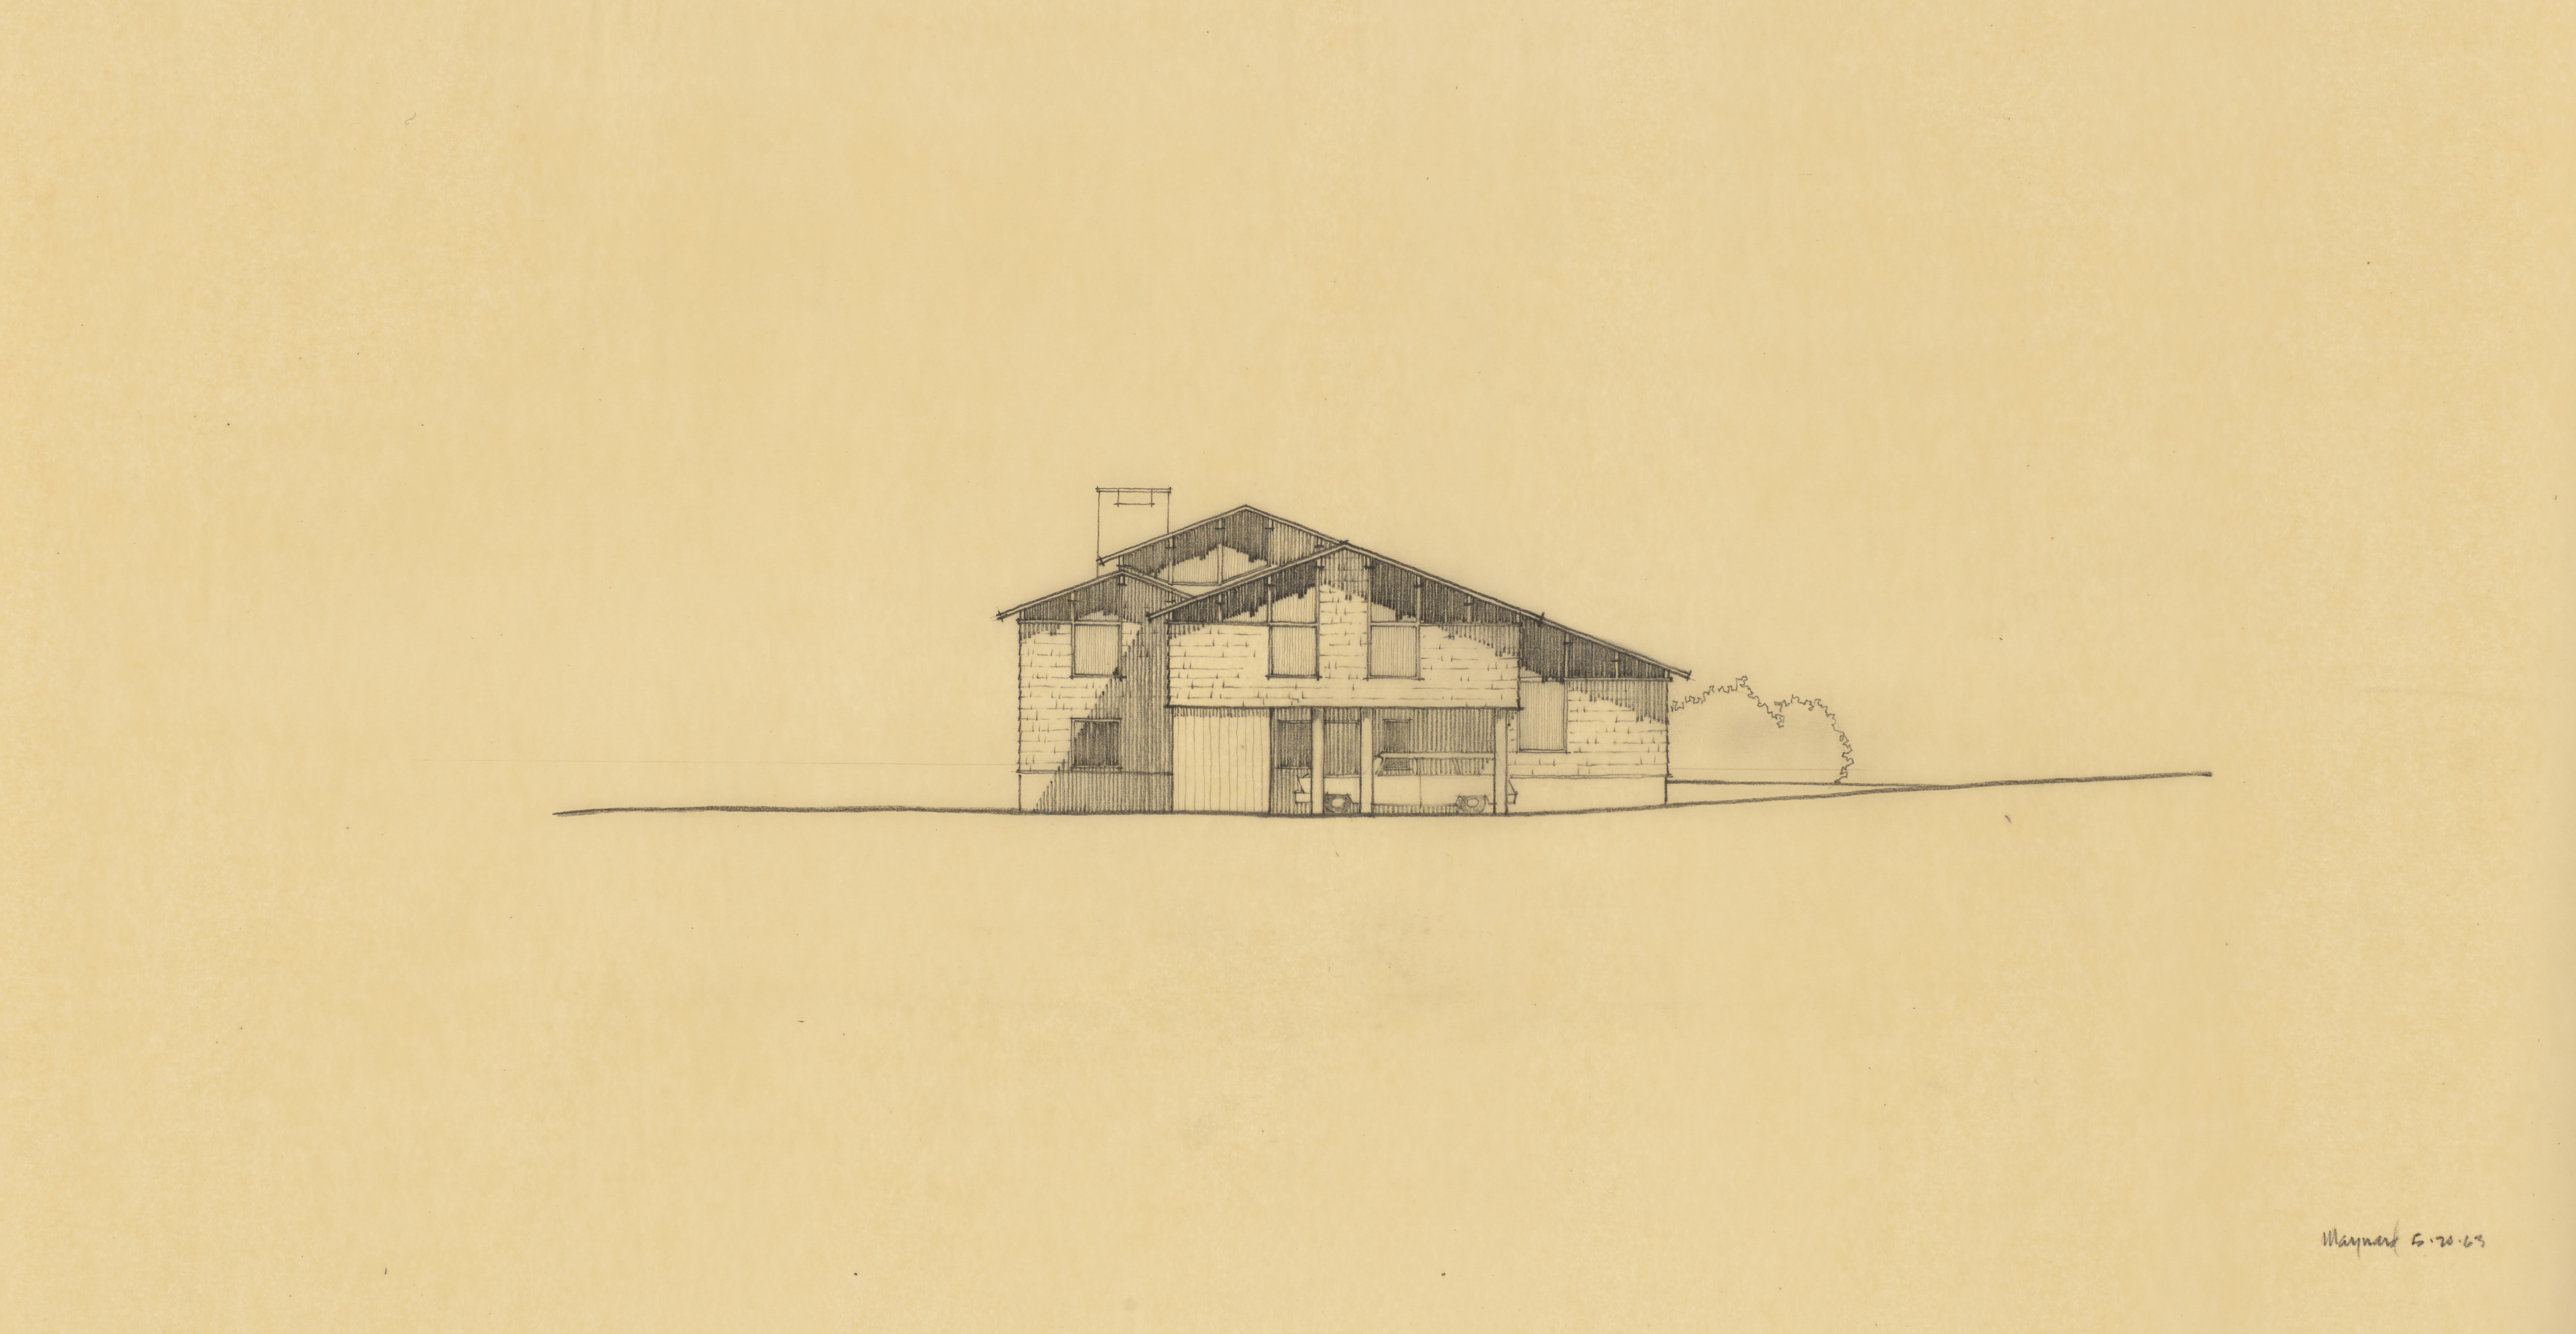 EPM Untitled East Elevation, 1963, graphite on tracing paper, 14 x 24 inches